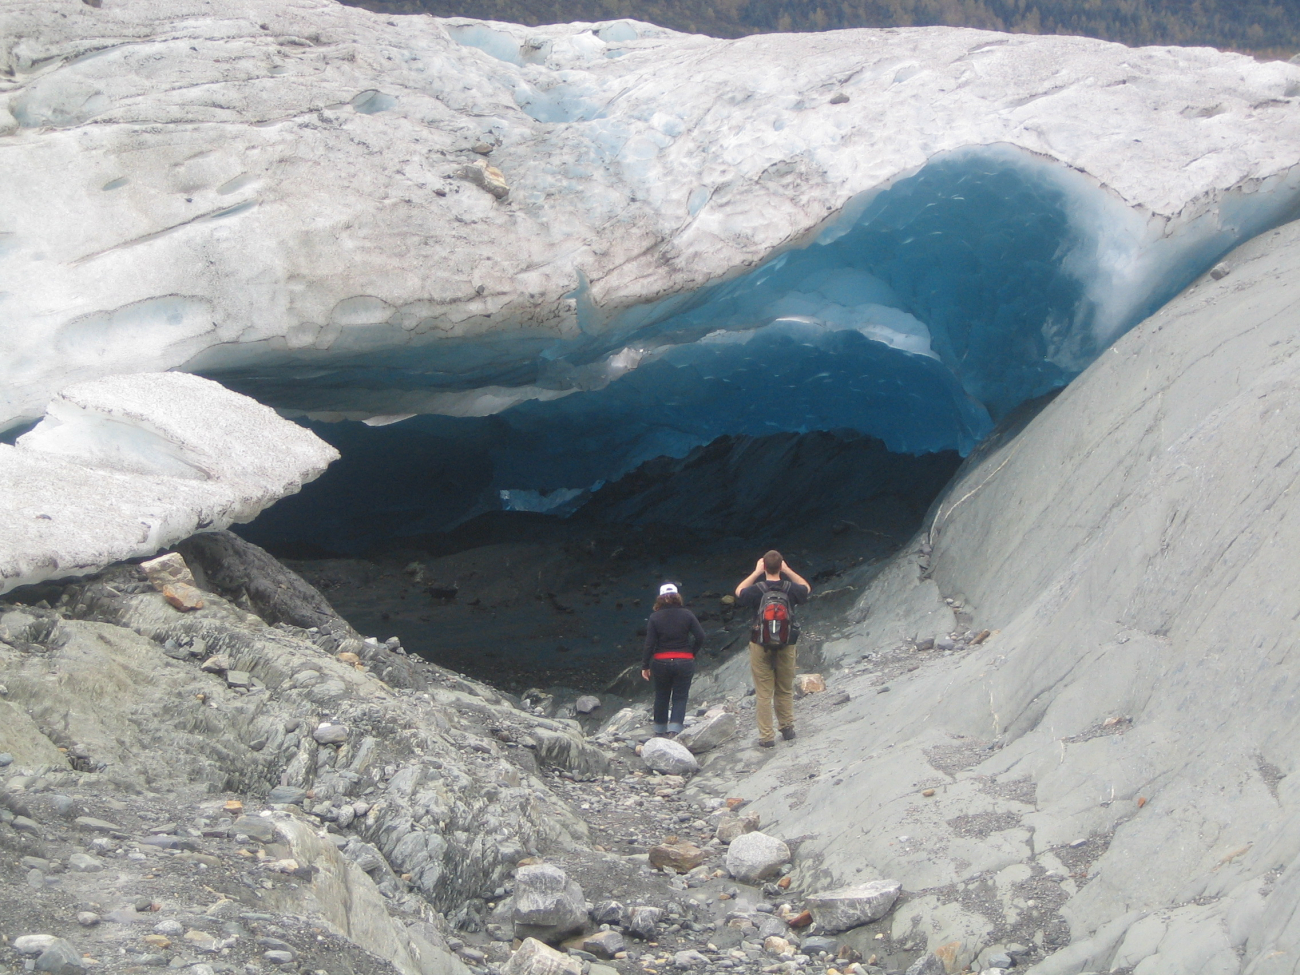 A large ice cave in the Mendenhall Glacier